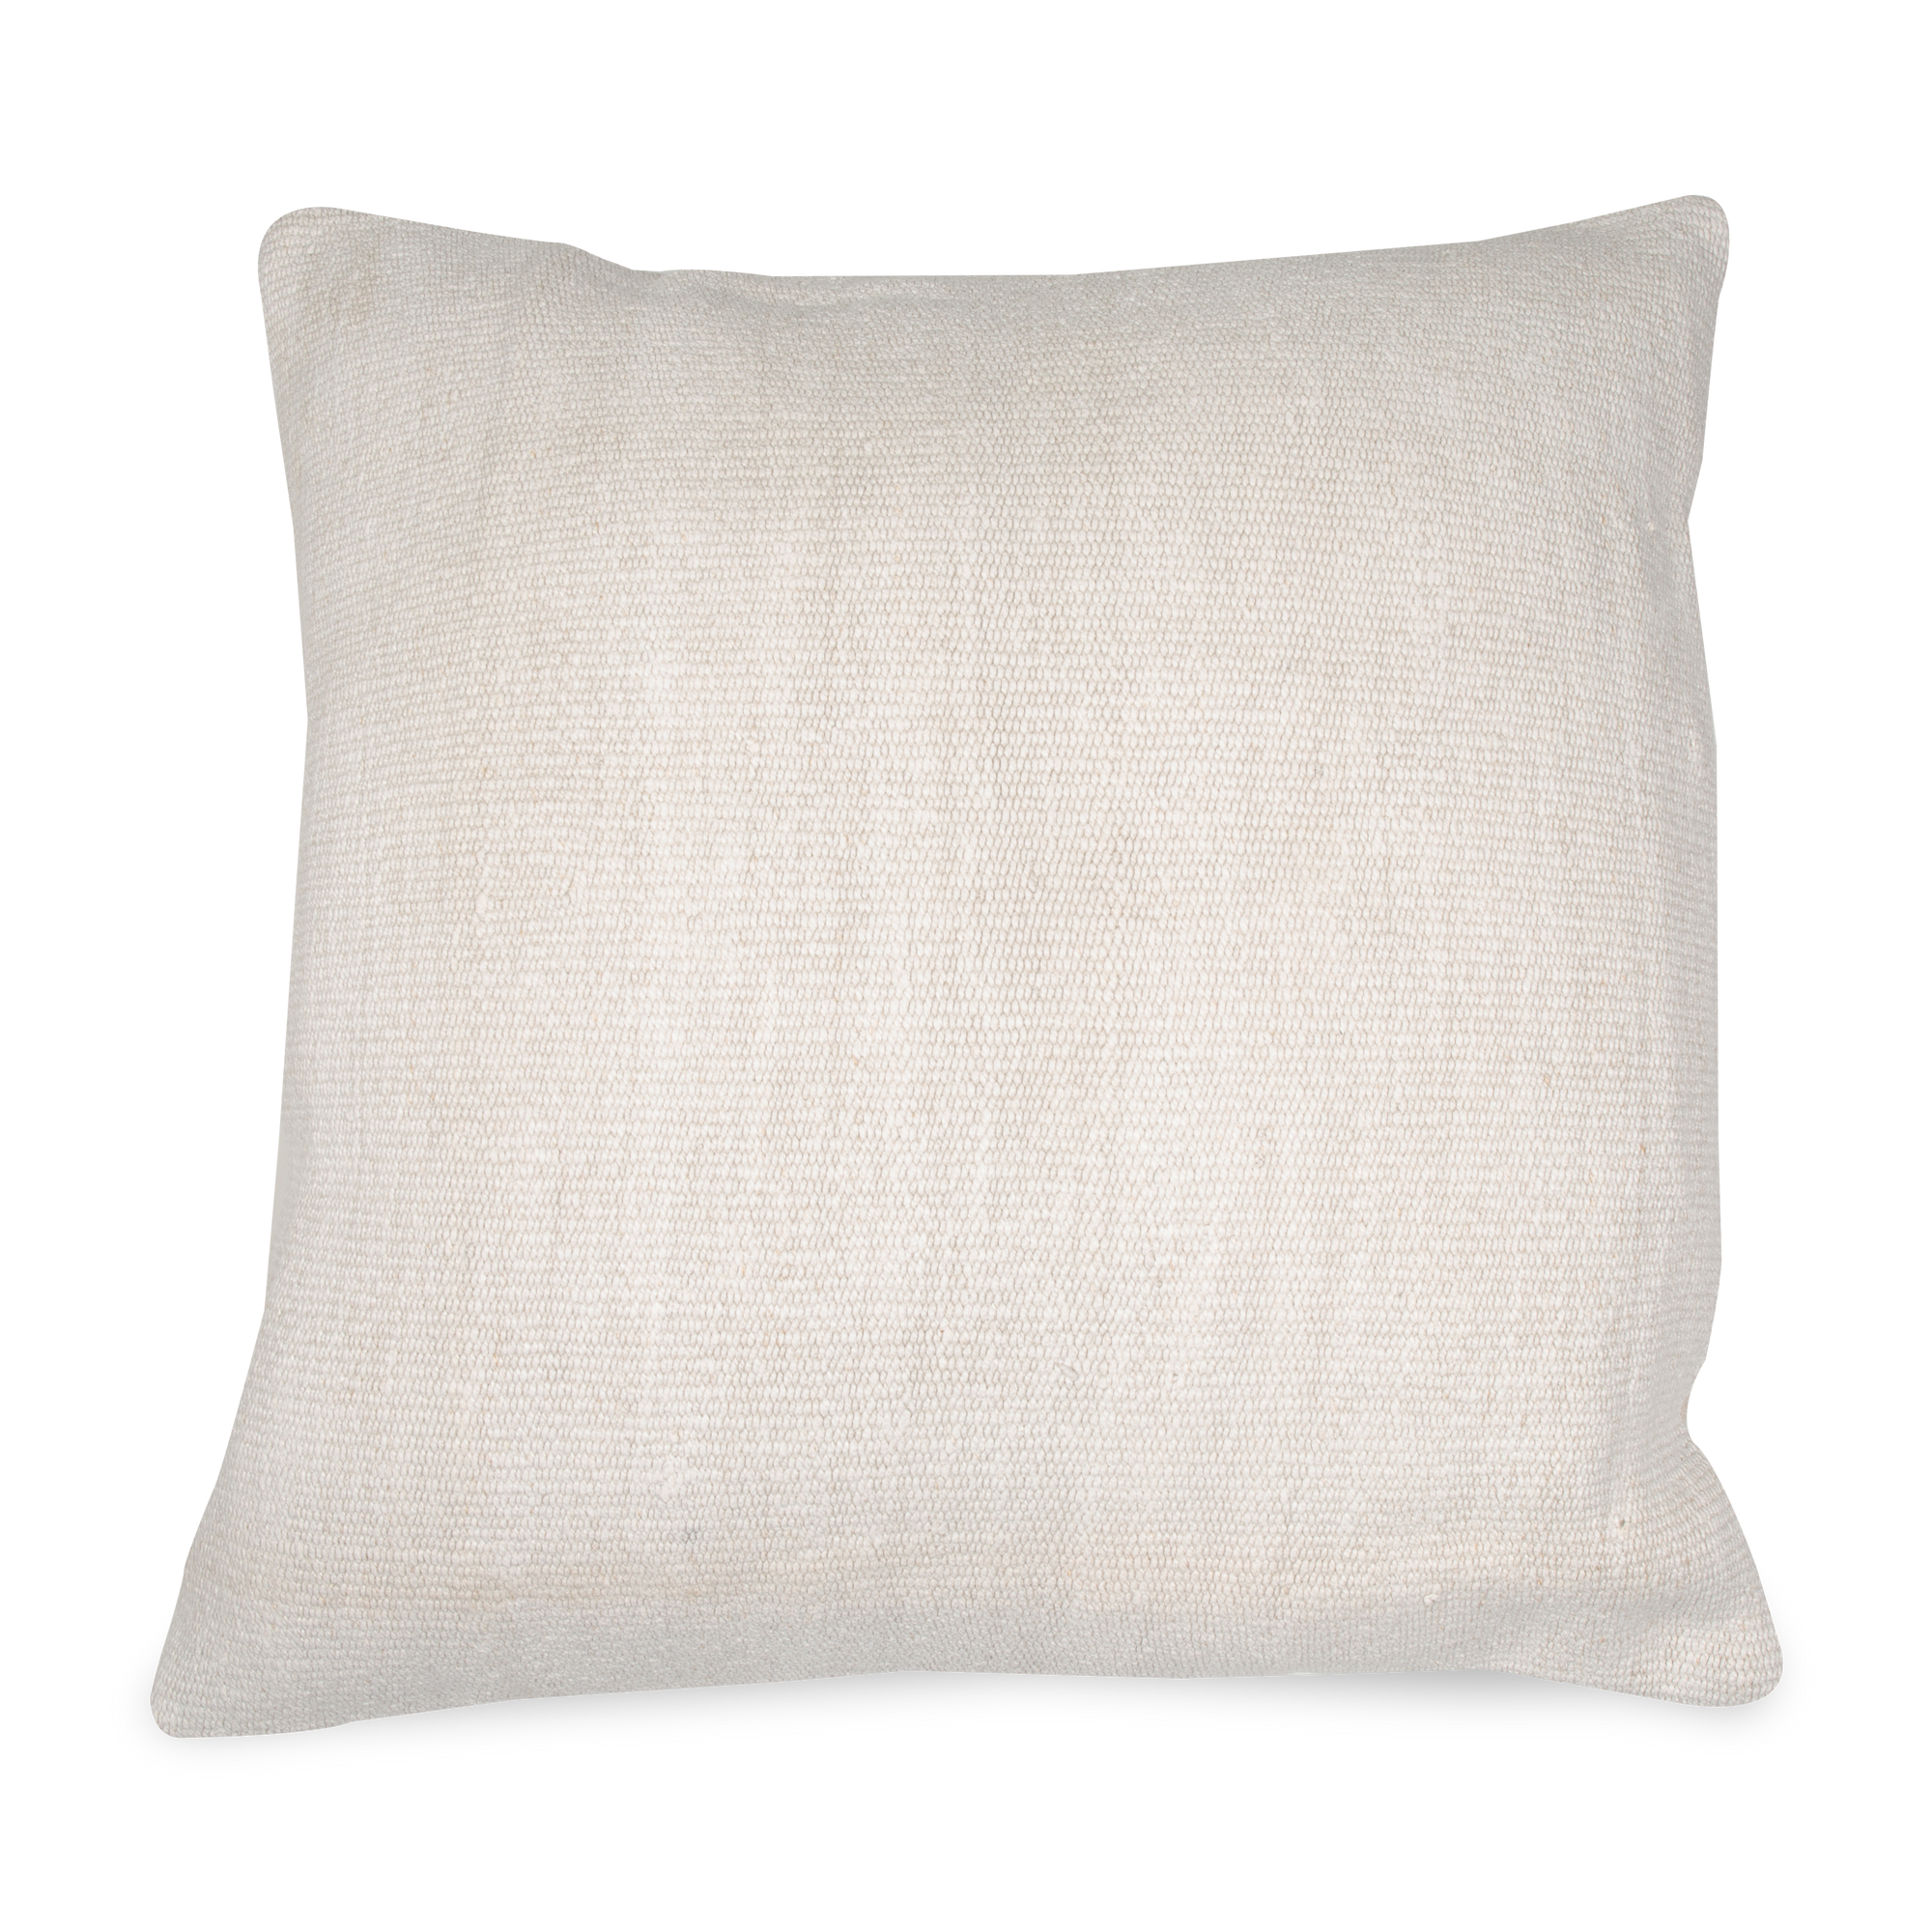 The Solid Hemp Pillow is made from a hemp rug with linen back.